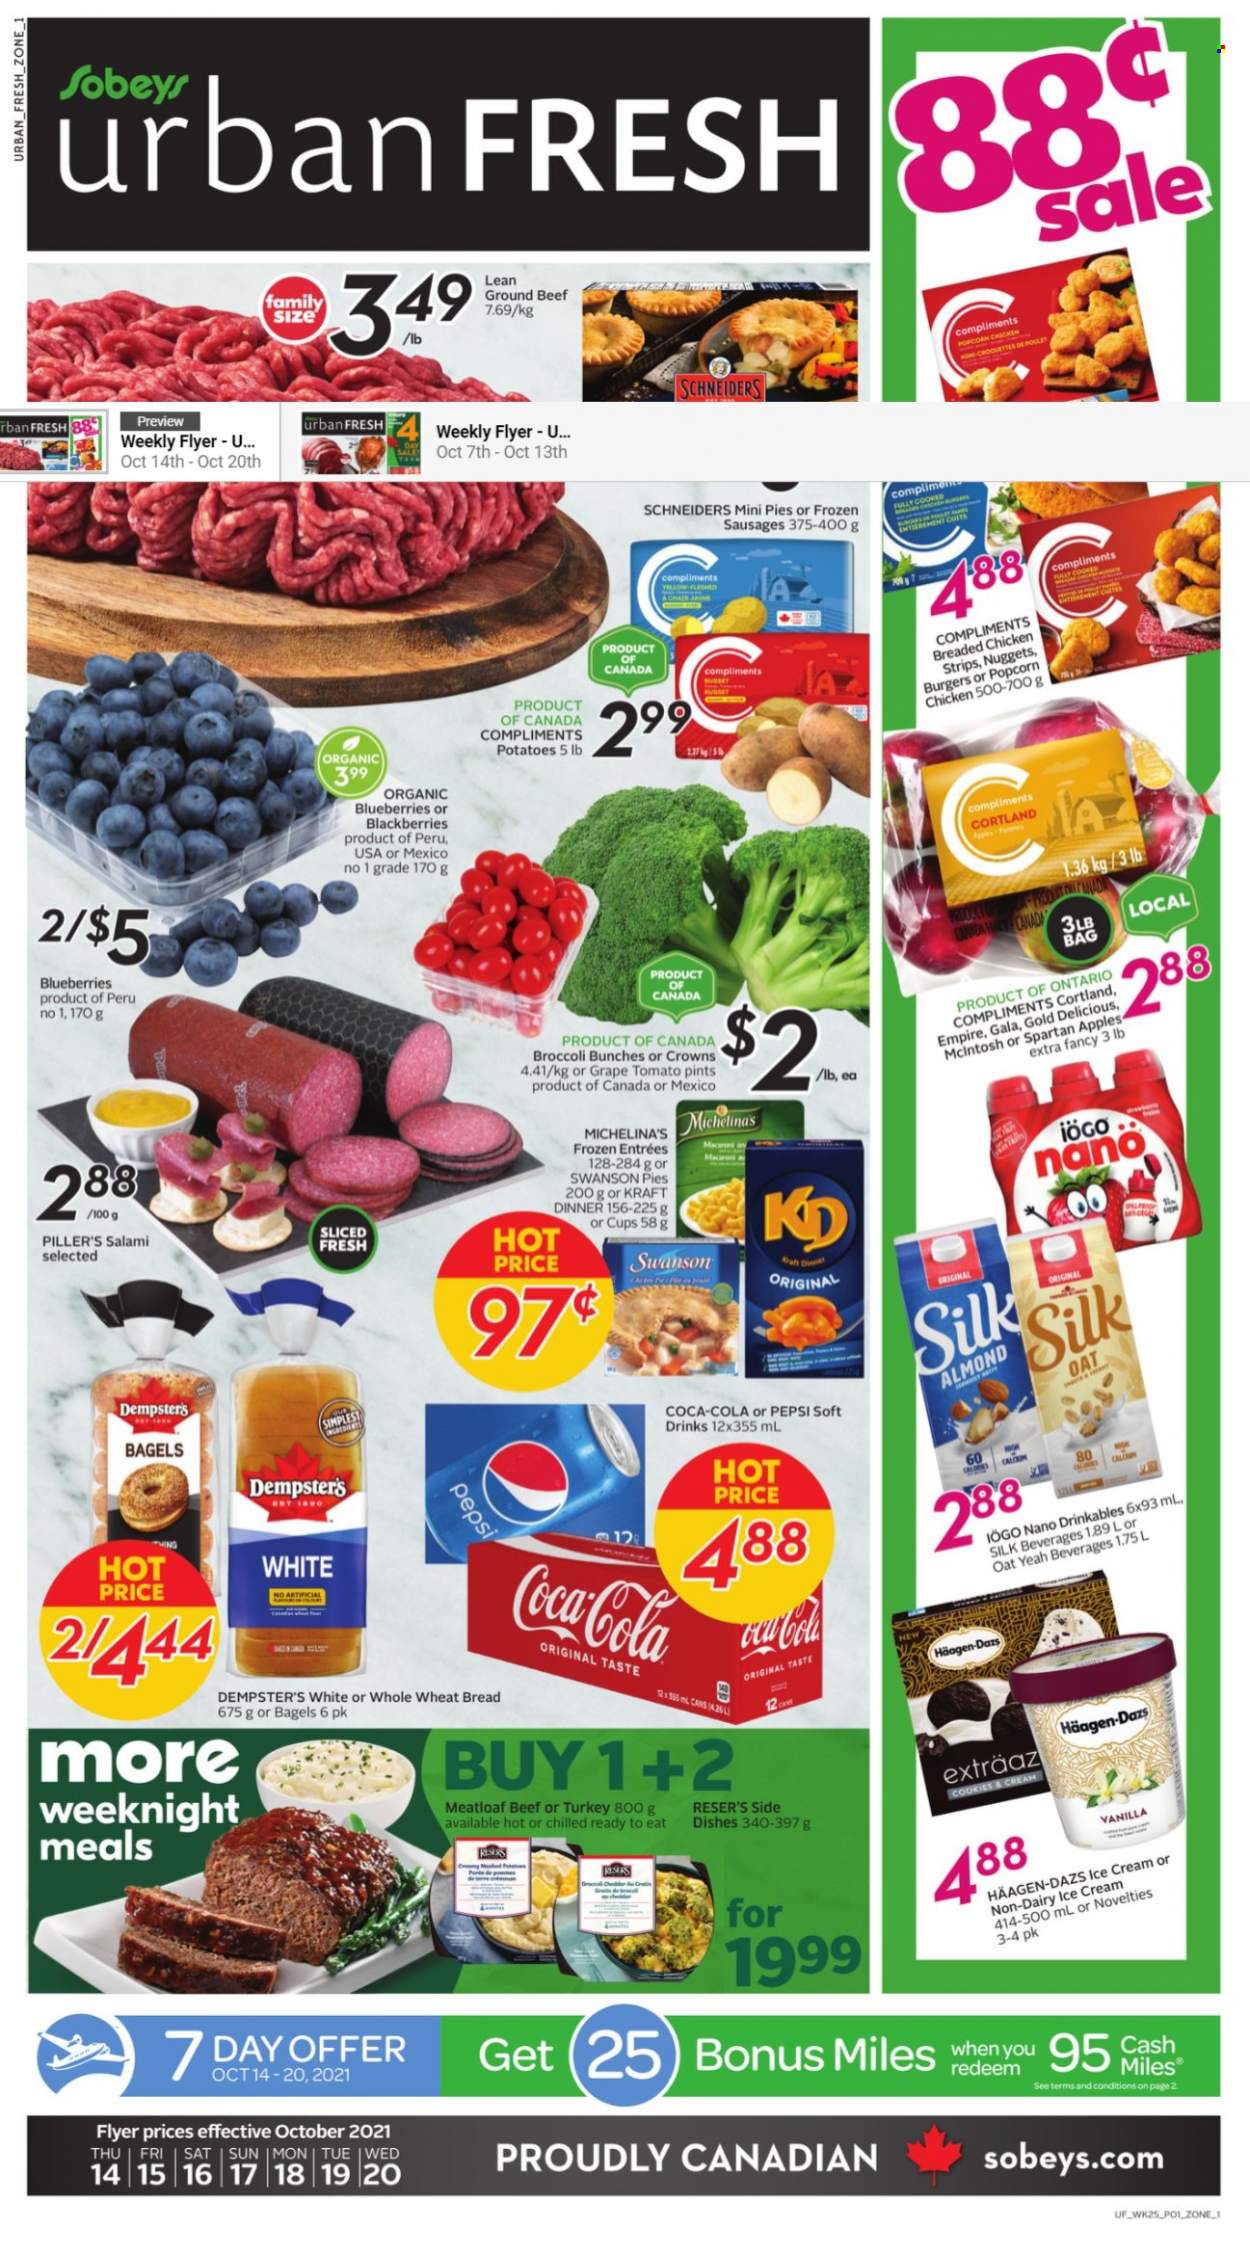 thumbnail - Sobeys Urban Fresh Flyer - October 14, 2021 - October 20, 2021 - Sales products - bagels, wheat bread, macaroons, broccoli, potatoes, apples, blackberries, blueberries, Gala, nuggets, hamburger, fried chicken, meatloaf, Kraft®, salami, sausage, Silk, ice cream, Häagen-Dazs, strips, chicken strips, cookies, popcorn, Coca-Cola, Pepsi, soft drink, beef meat, ground beef. Page 1.